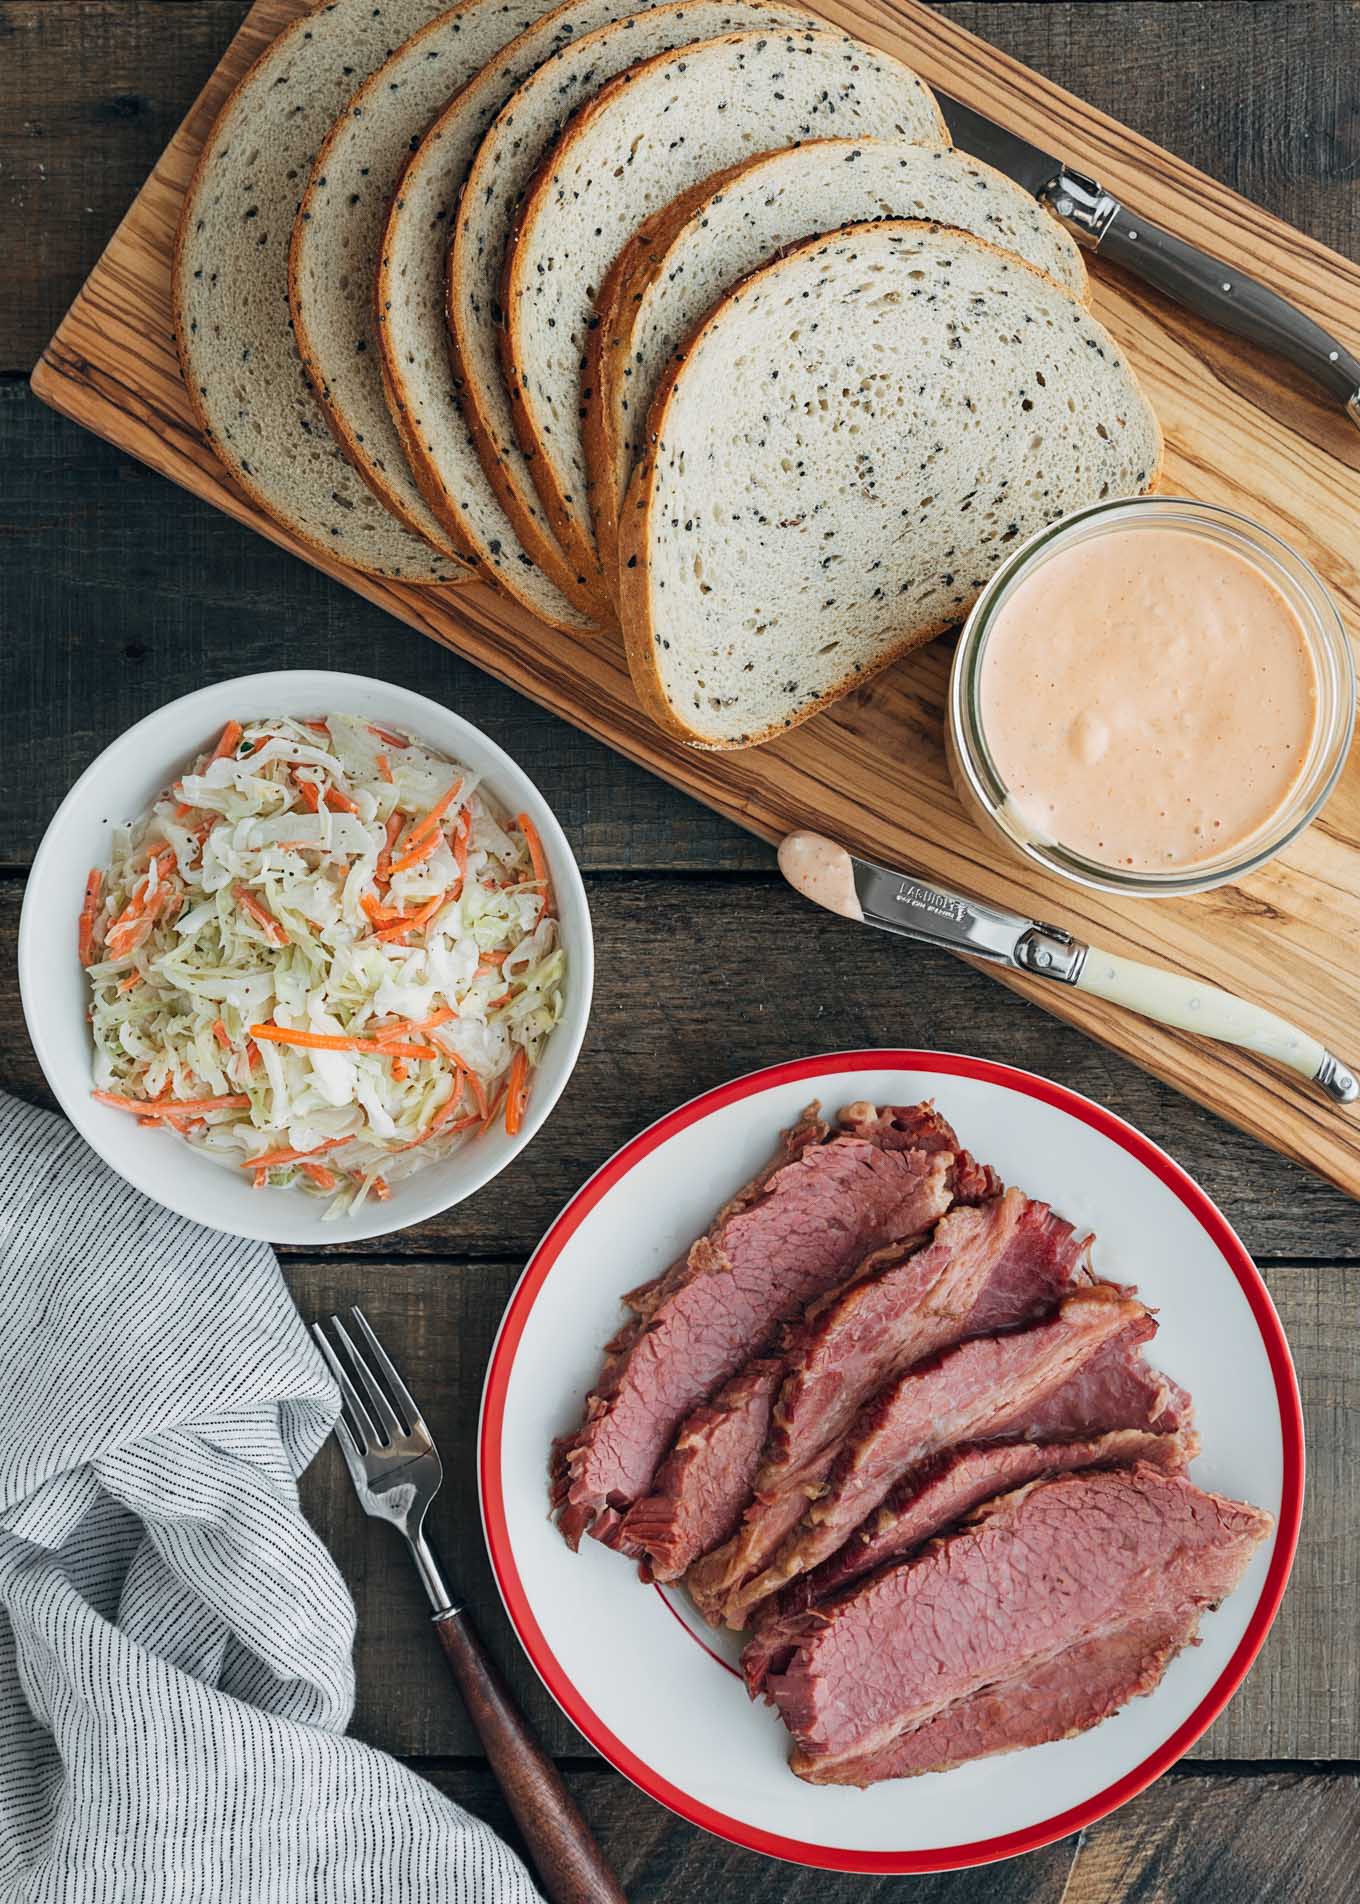 Corned Beef Sandwich with Coleslaw and Russian Dressing - Striped Spatula